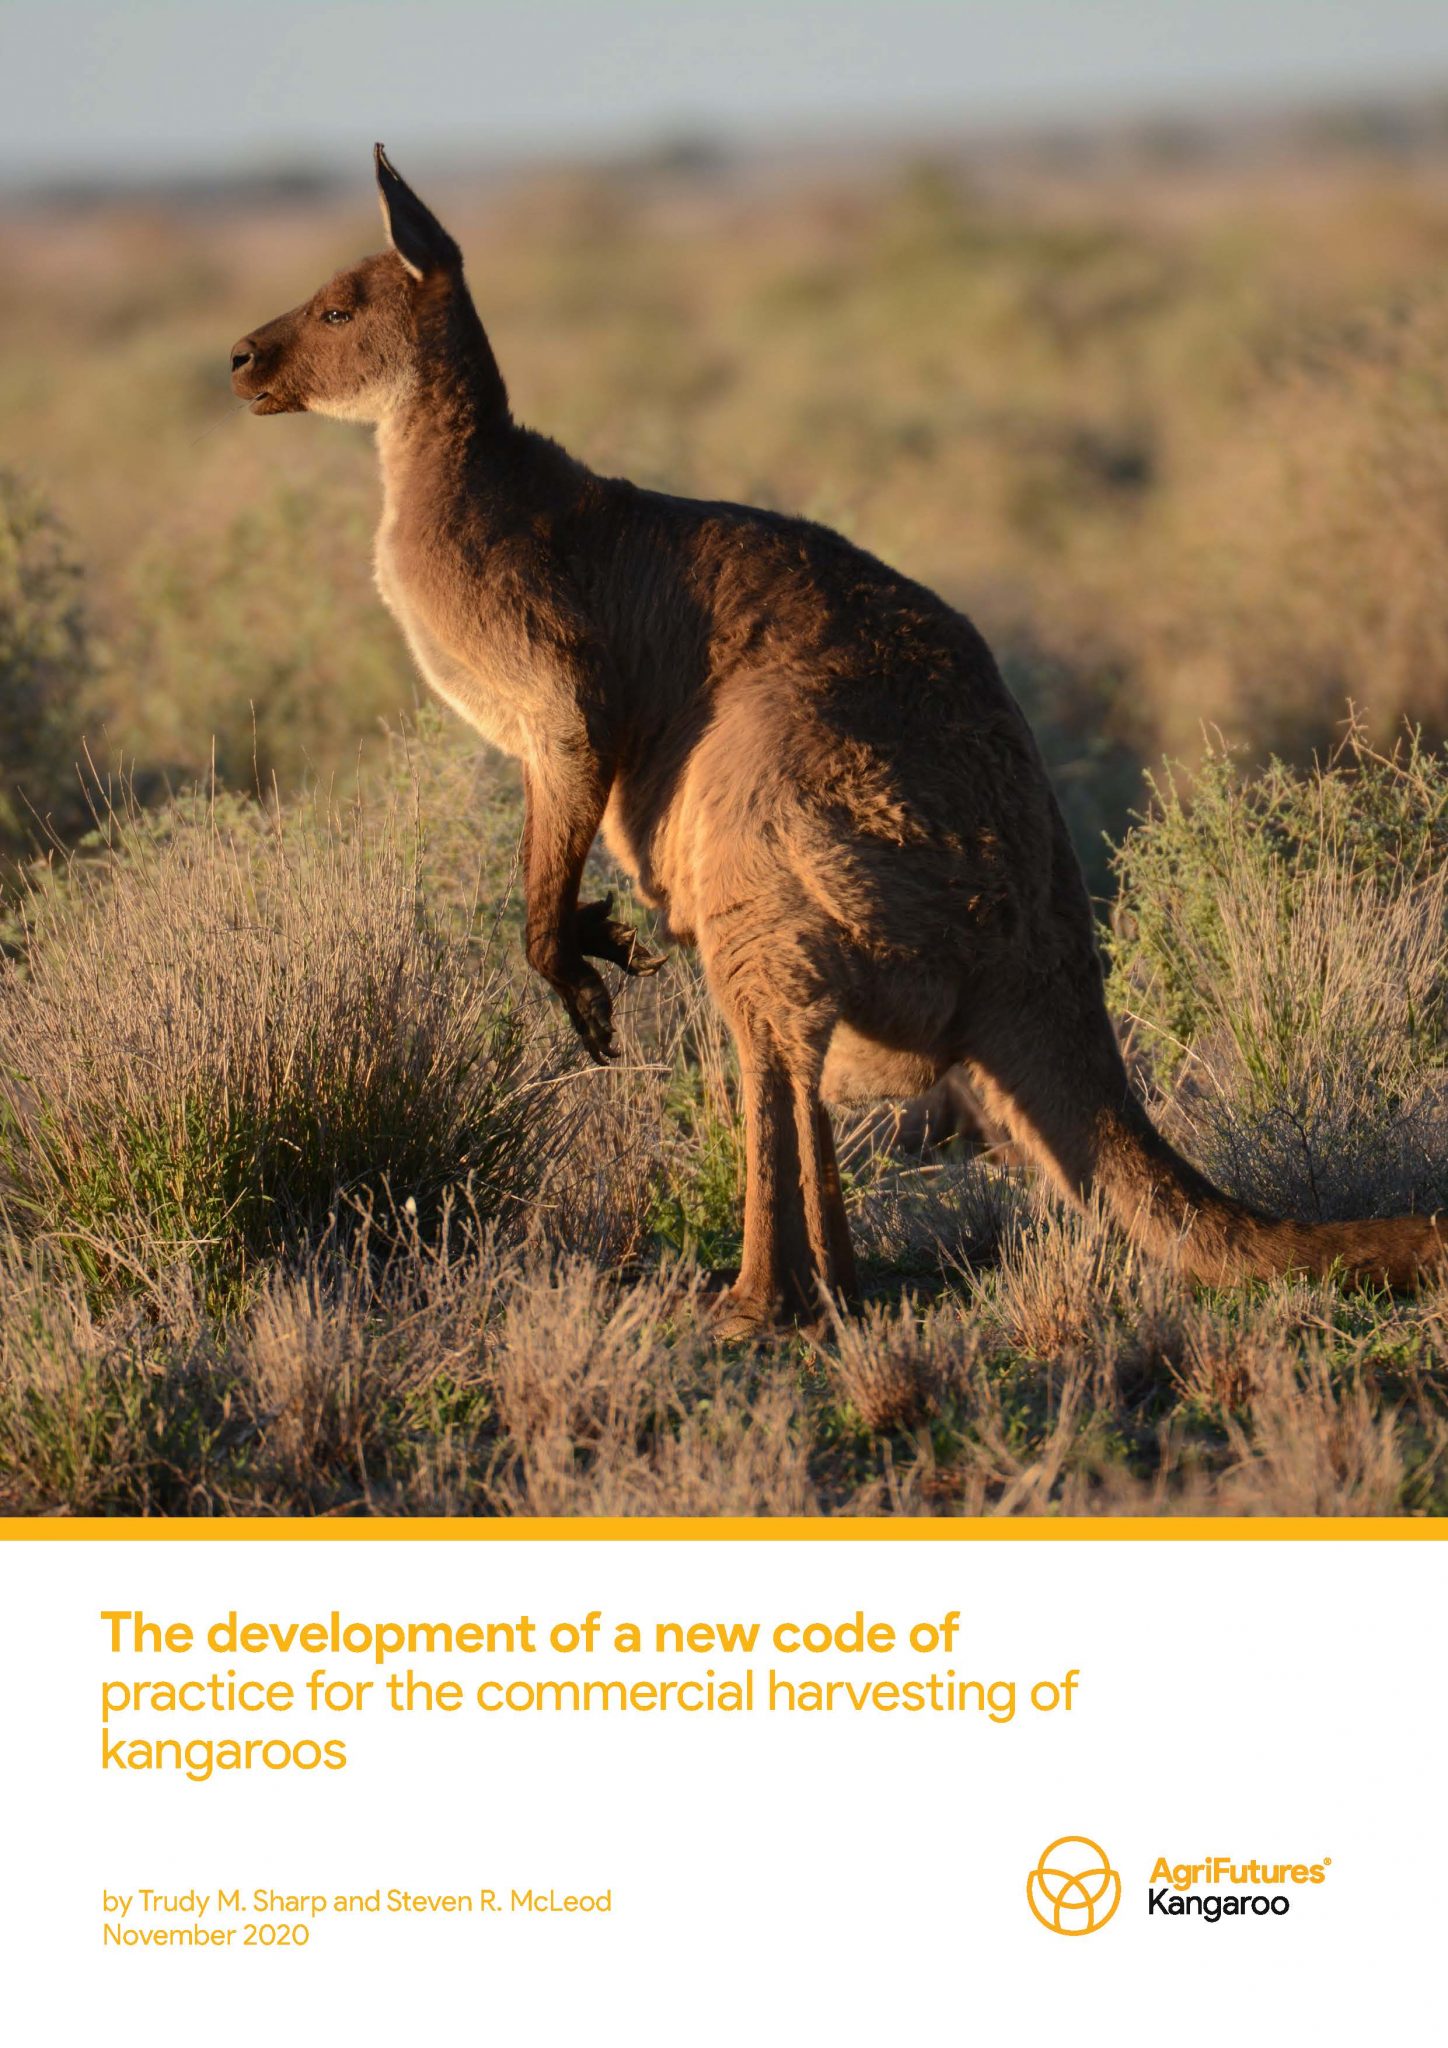 The development of a new code of practice for the commercial harvesting of kangaroos - image